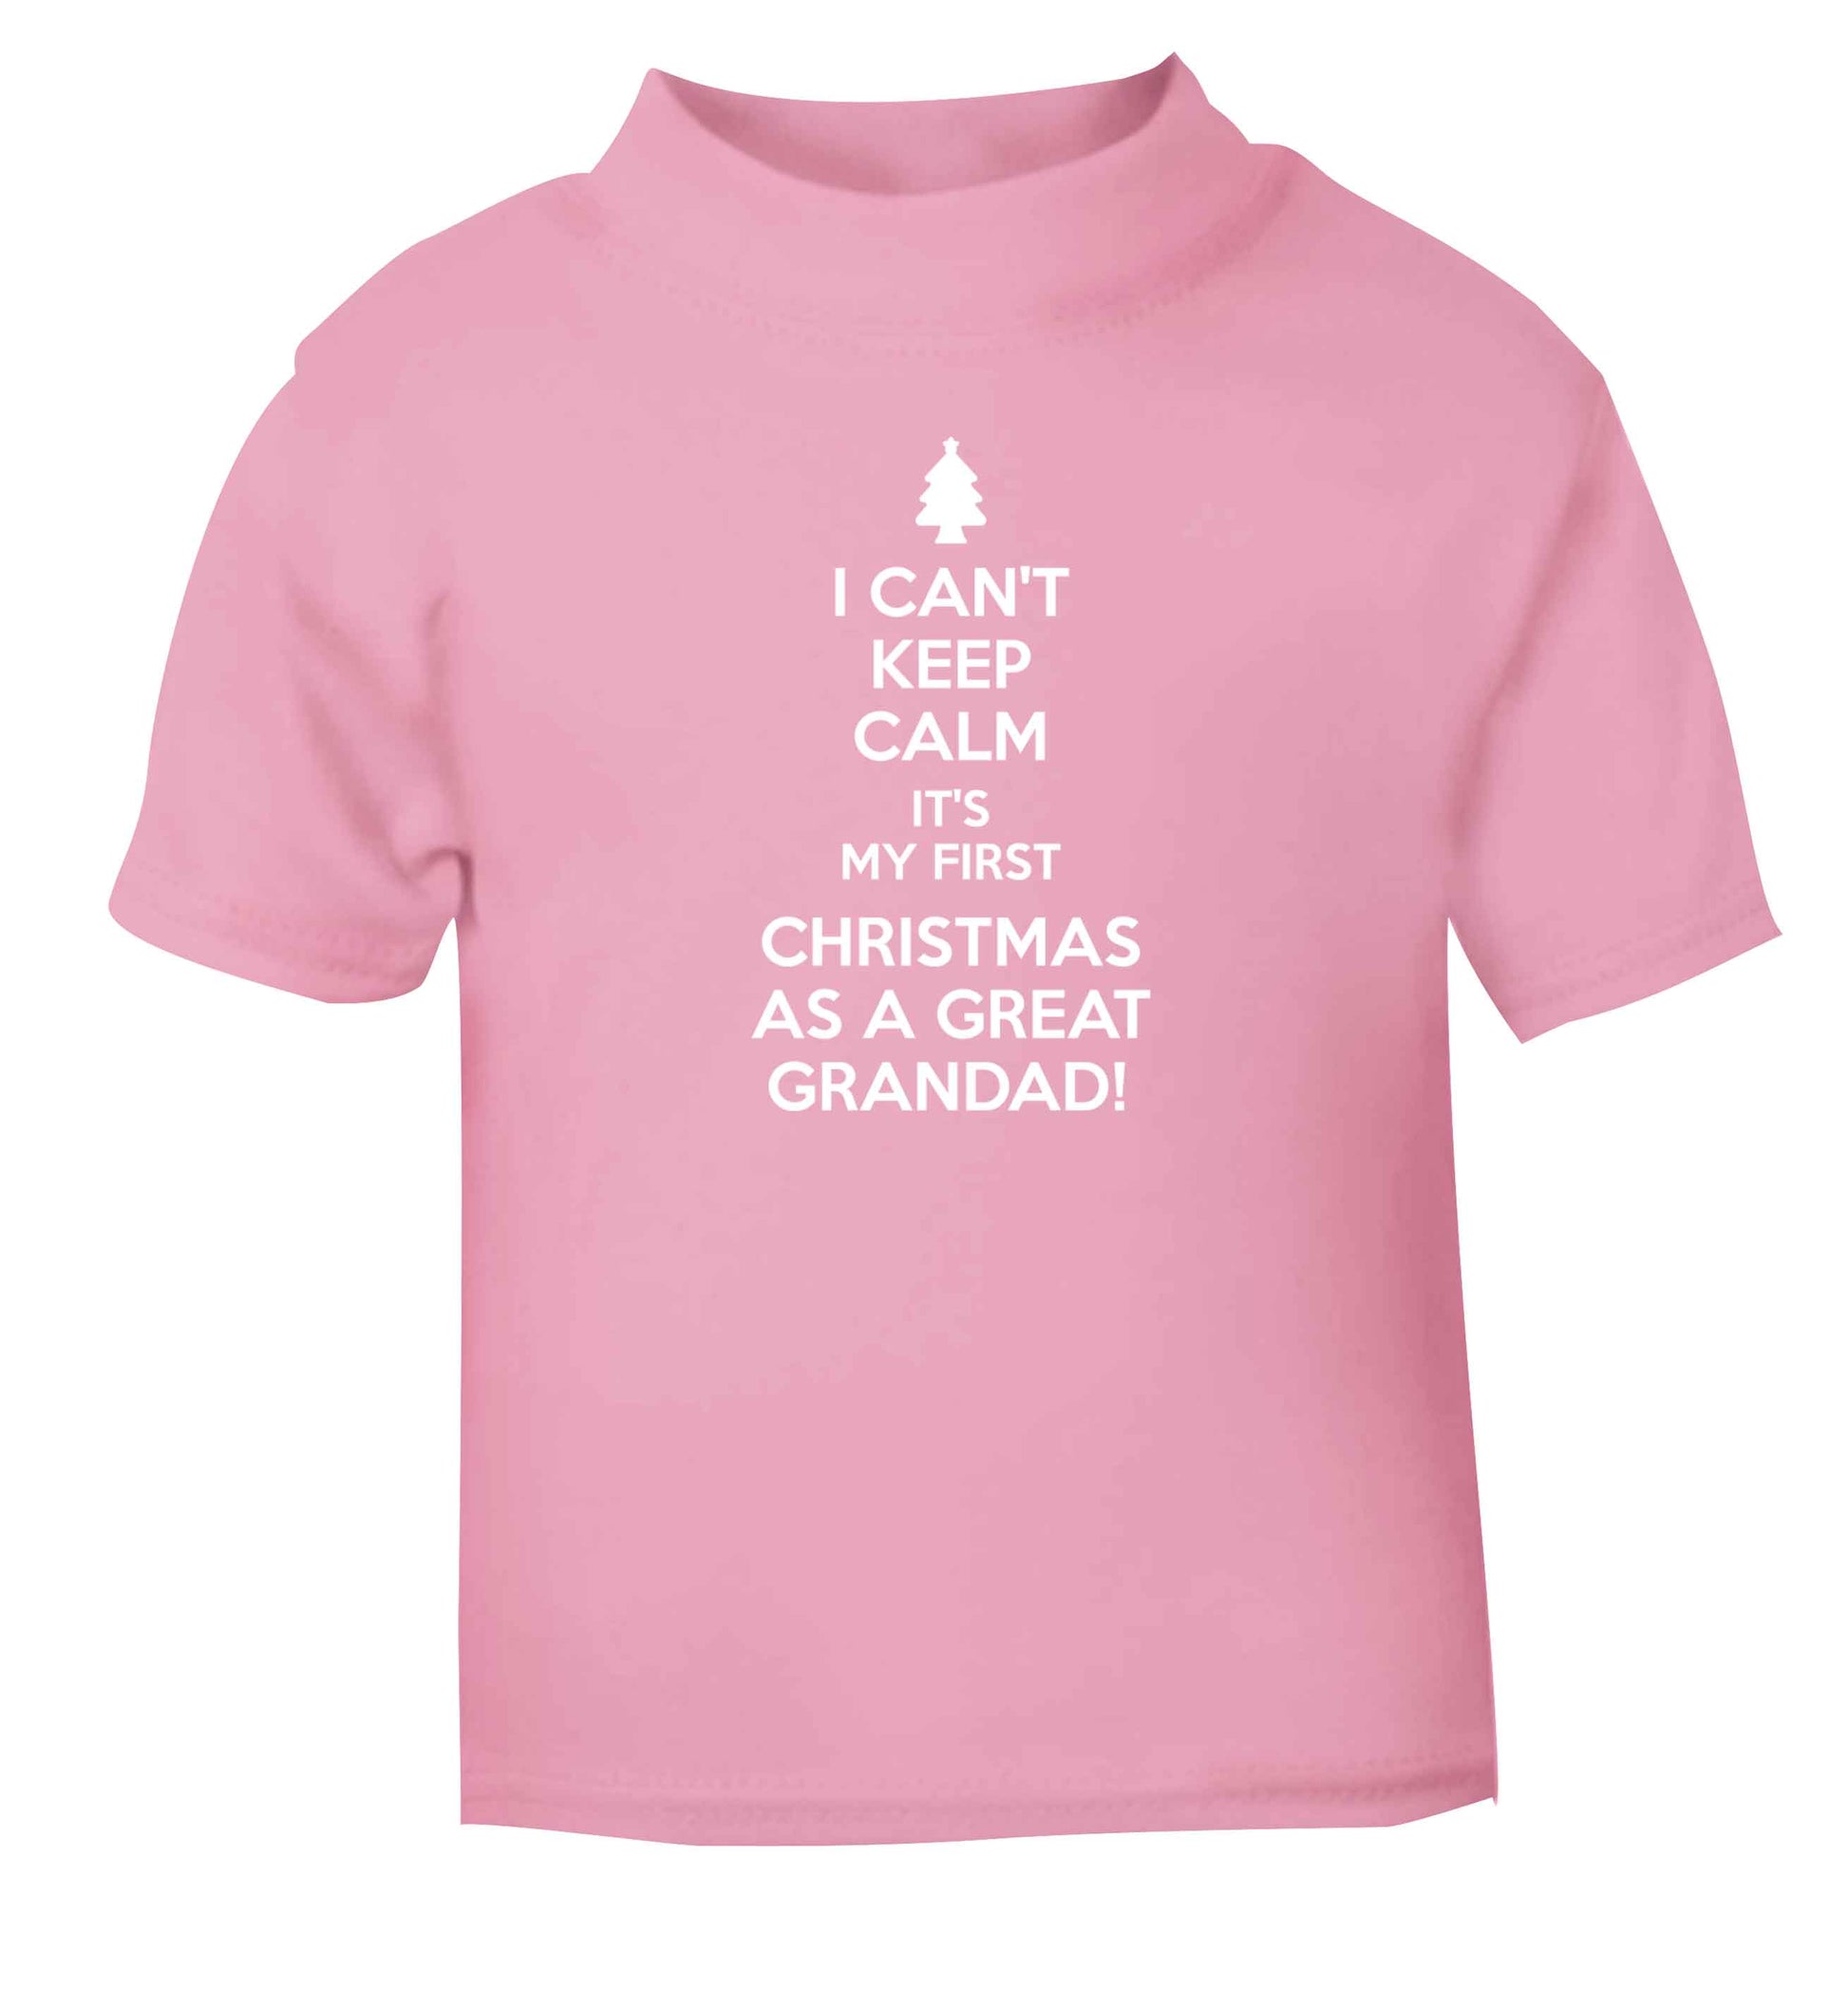 I can't keep calm it's my first Christmas as a great grandad! light pink Baby Toddler Tshirt 2 Years